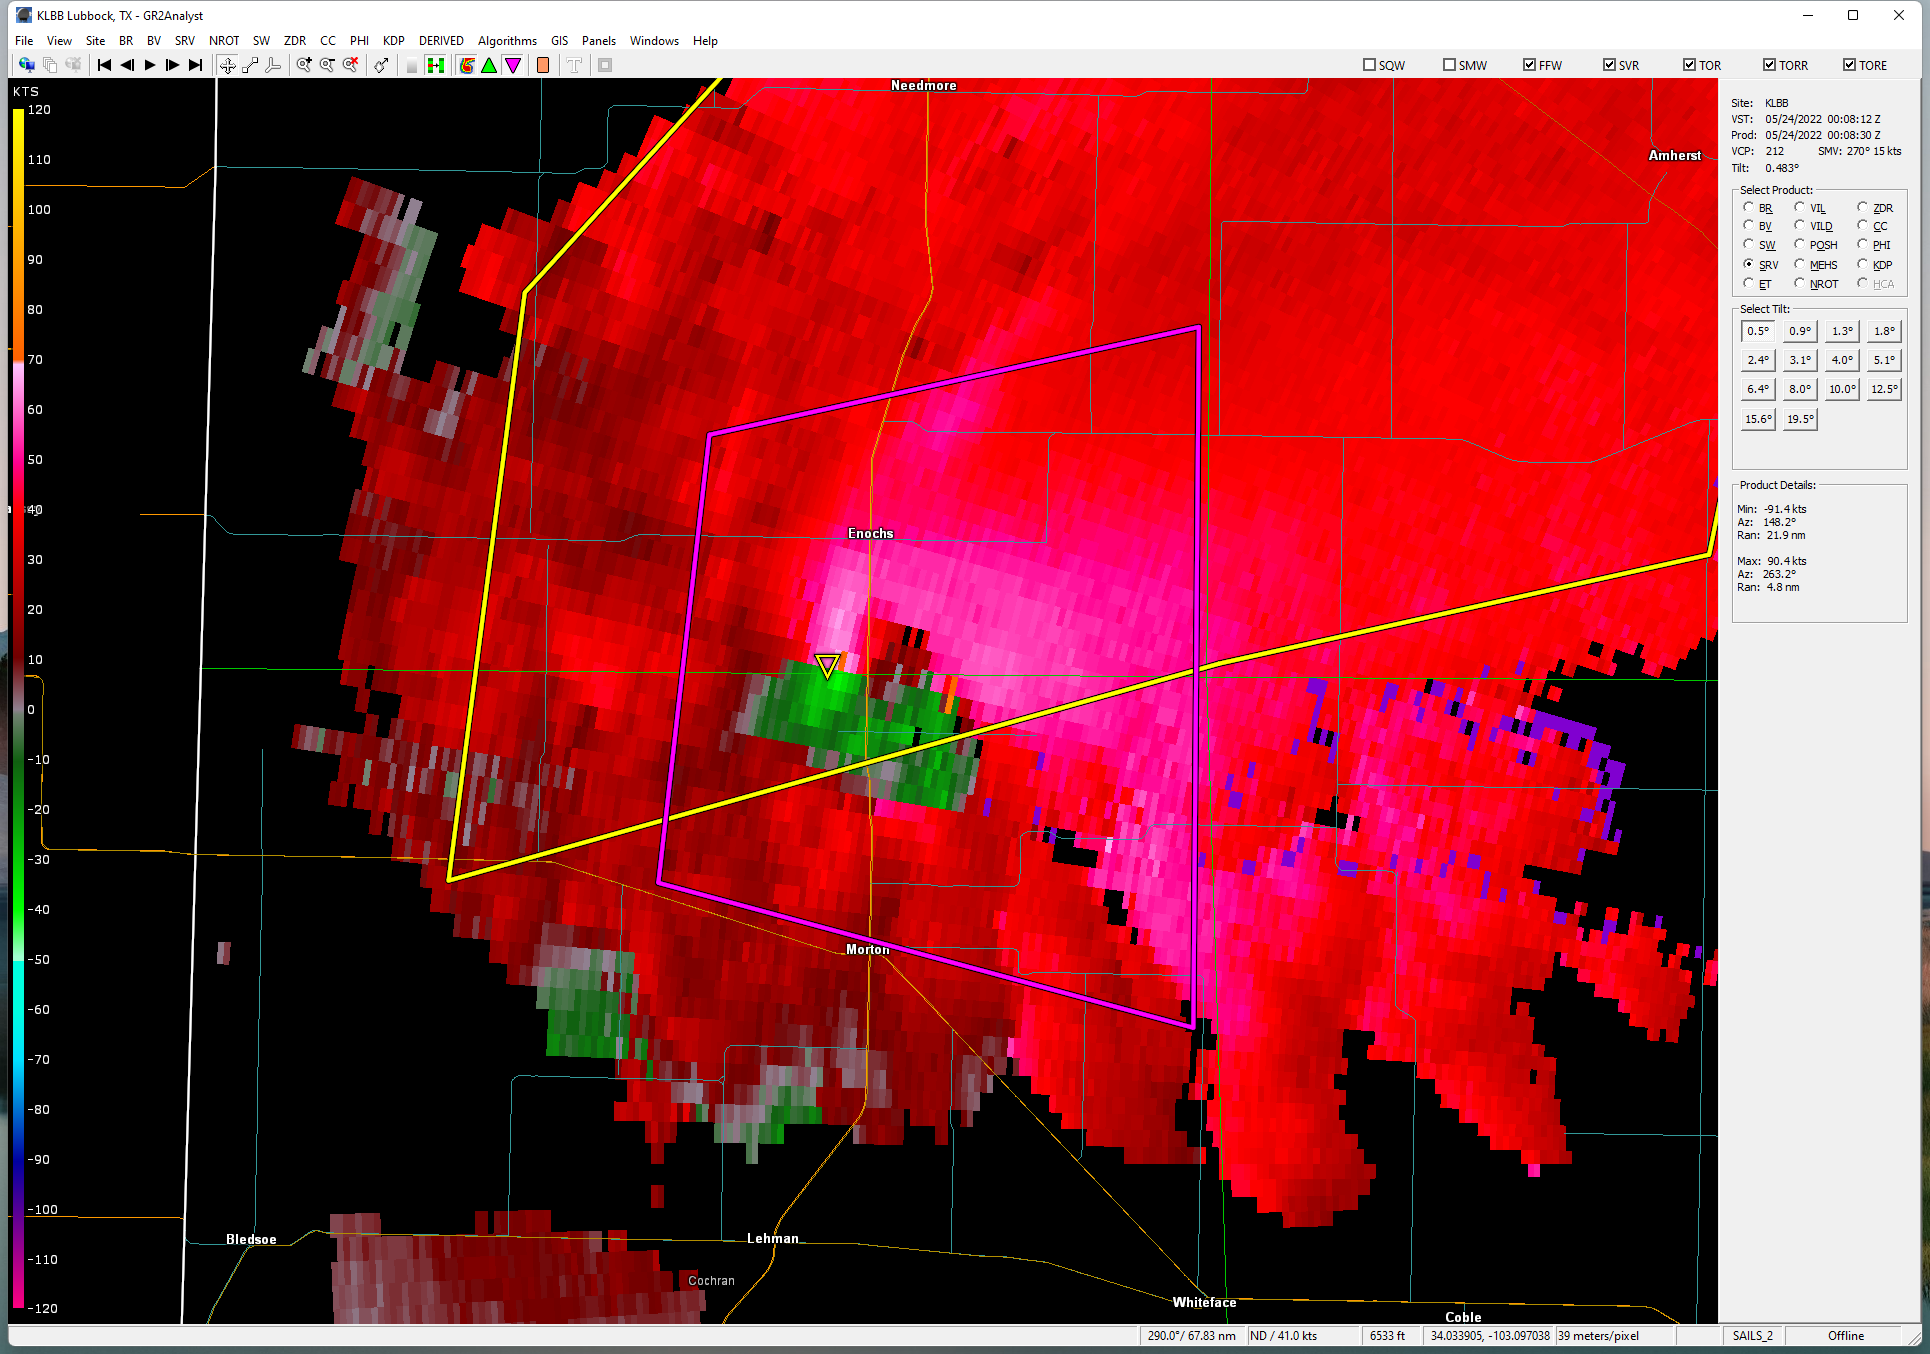 Lubbock WSR-88D 0.5 degree velocity data valid at 7:08 pm on 23 May 2022.